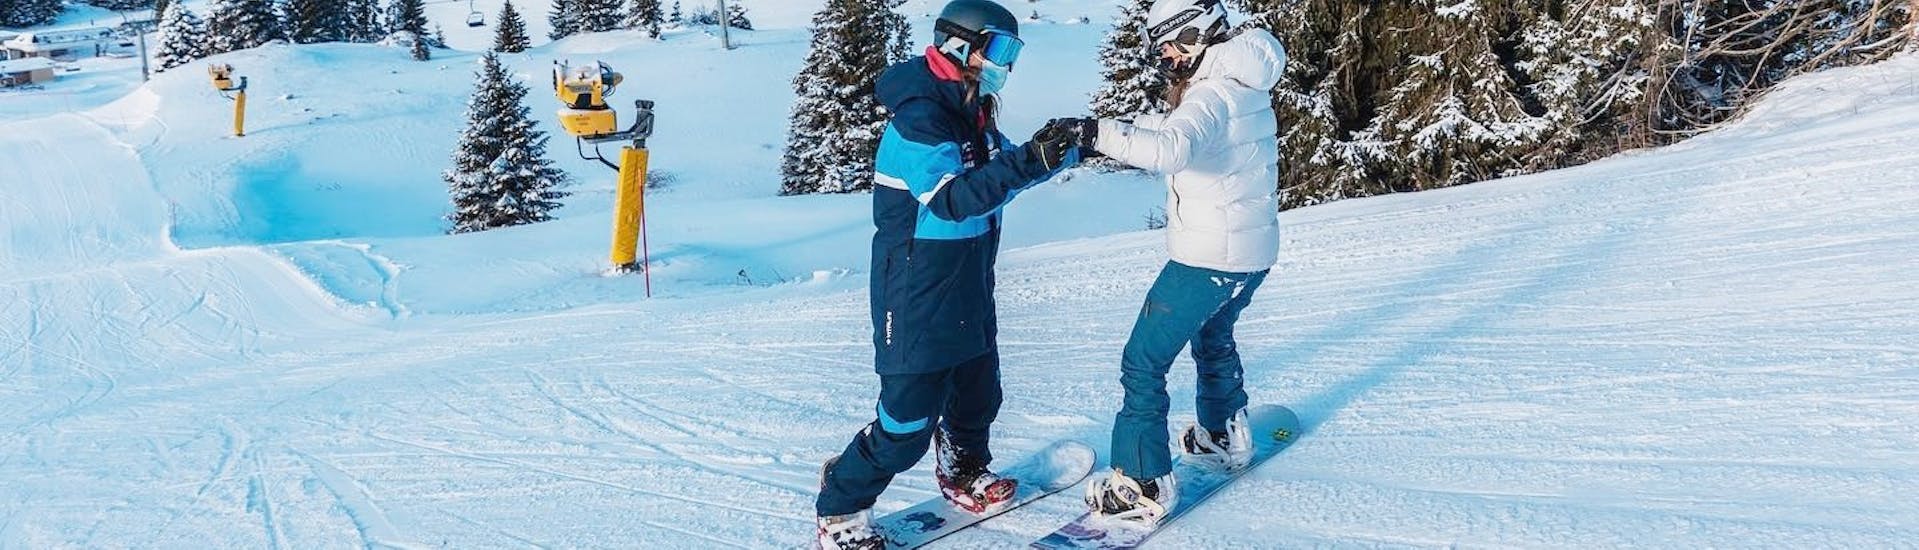 An instructor with a snowboarder during the Private Snowboarding Lessons for Kids & Adults of All Levels.